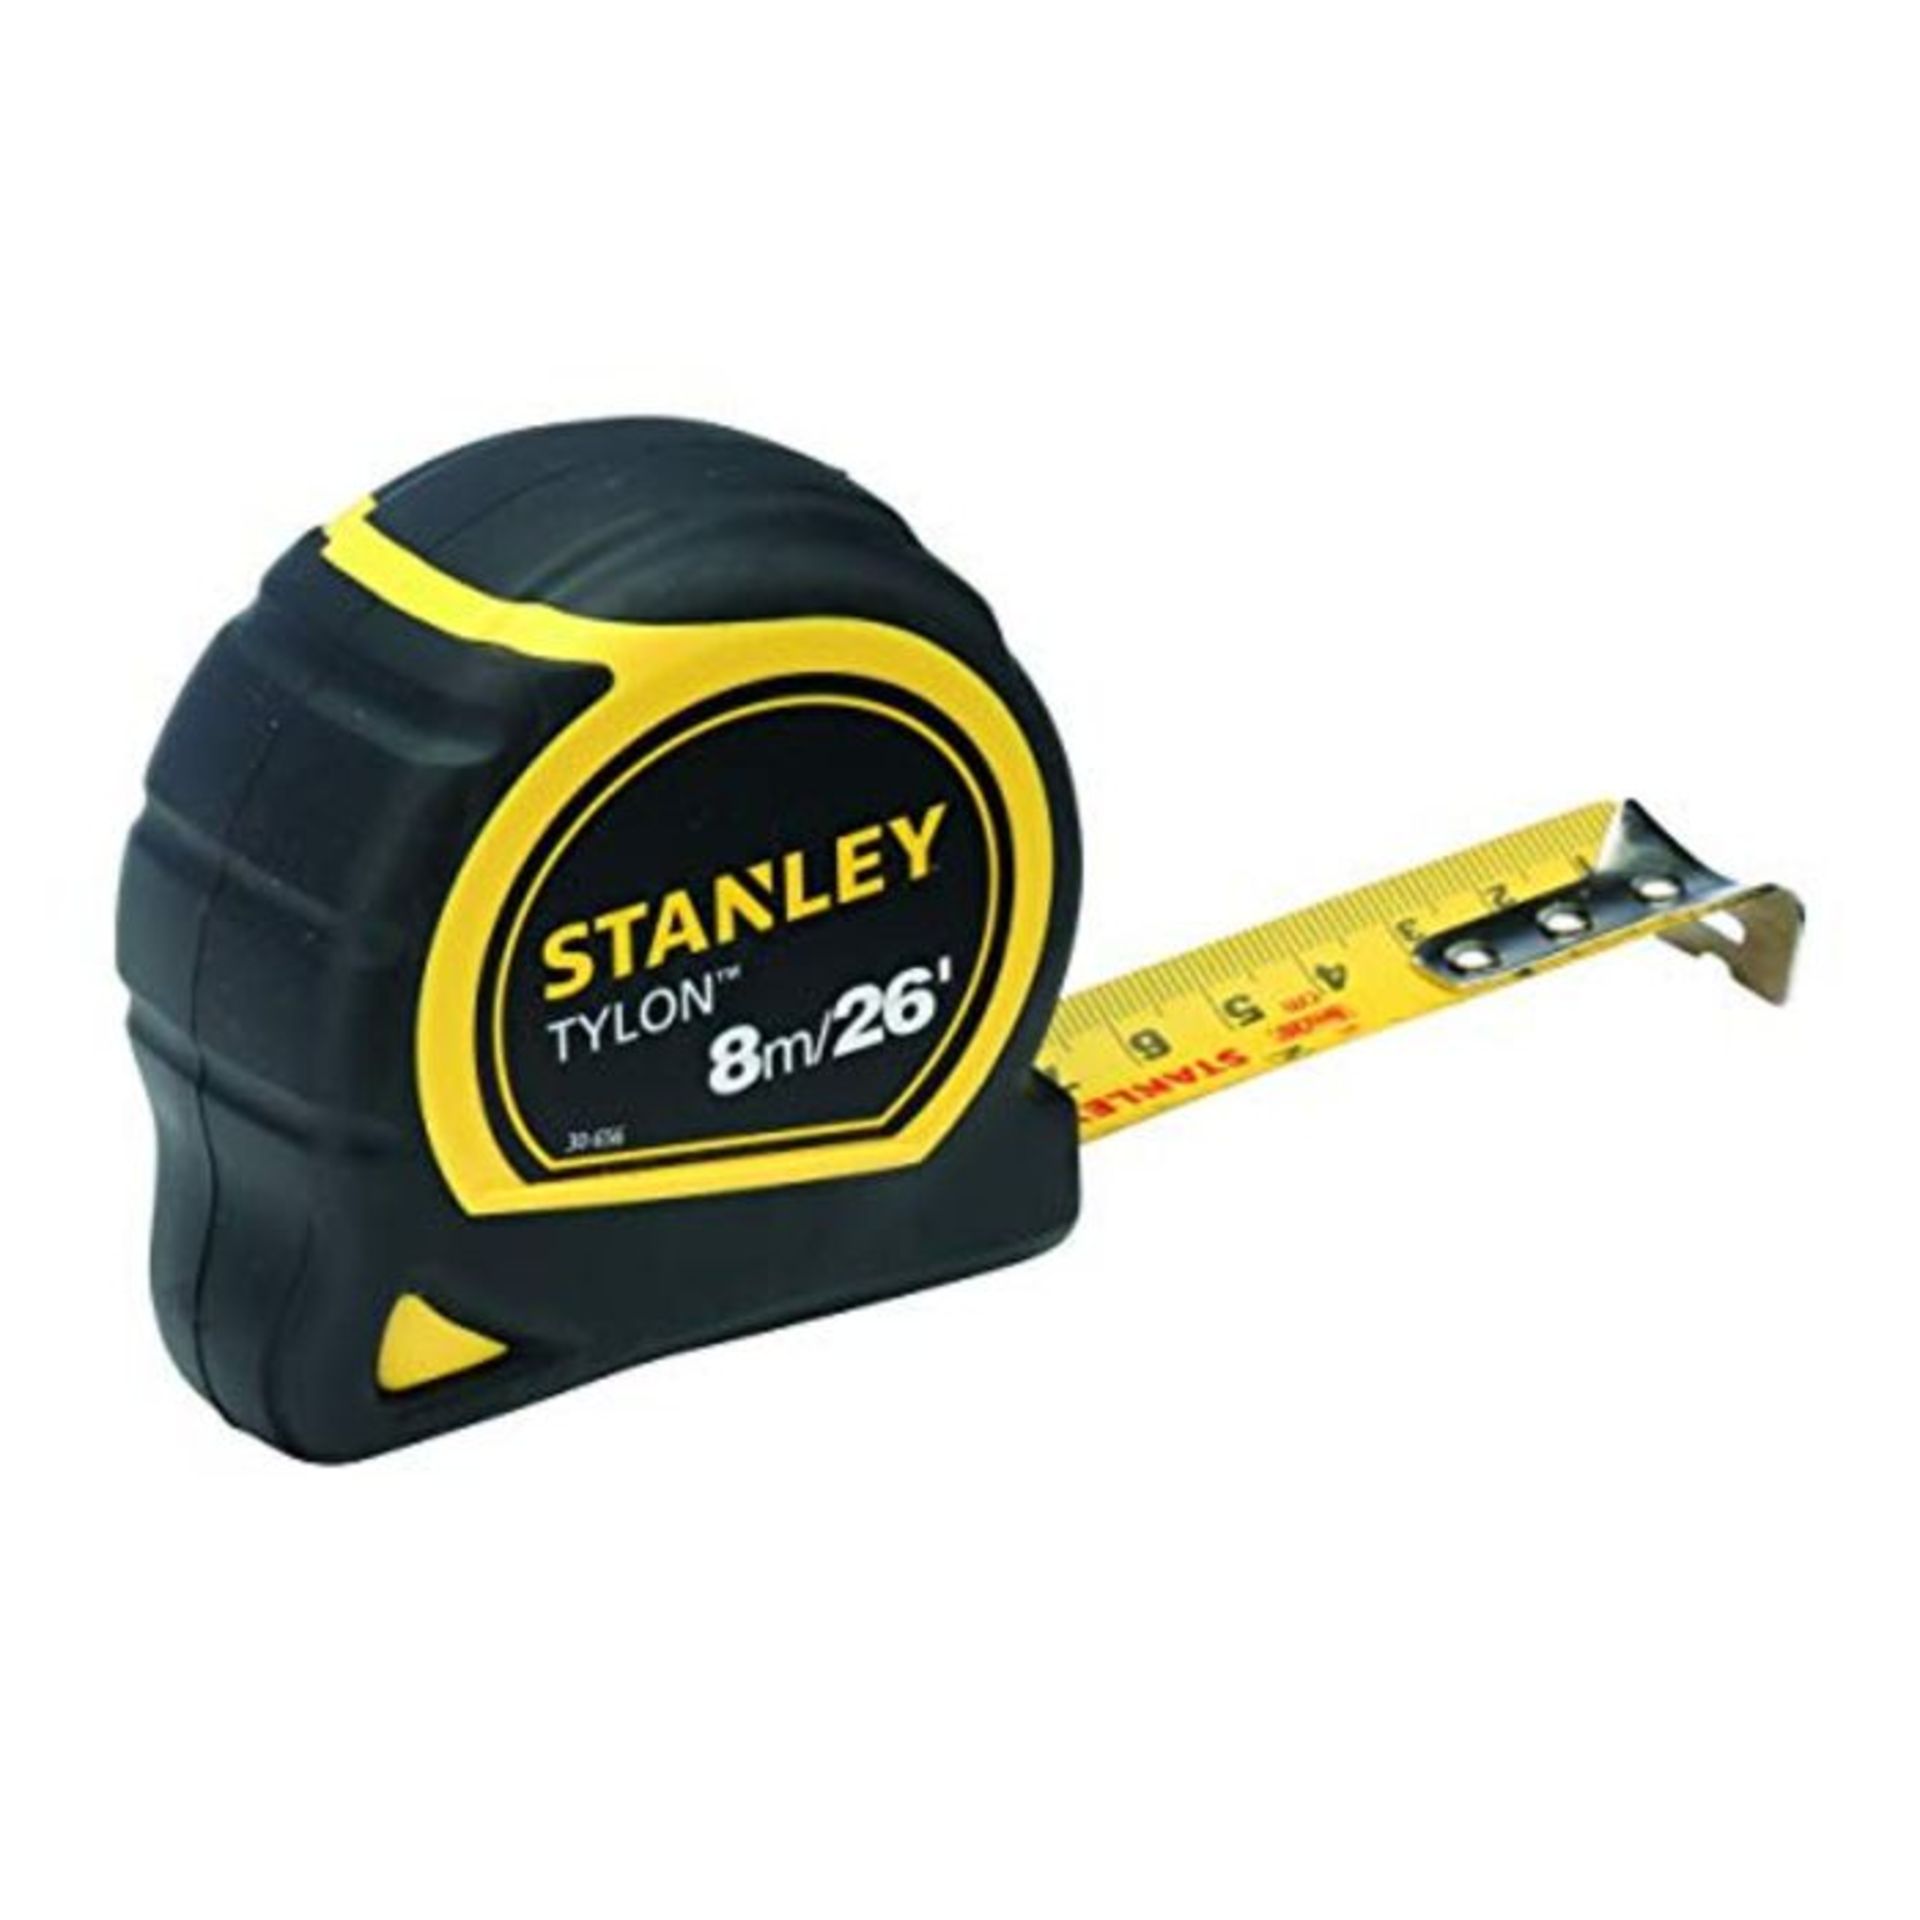 Stanley 1-30-656 Metric/Imperial Tape Measure with 25mm Blade, 8m/26'